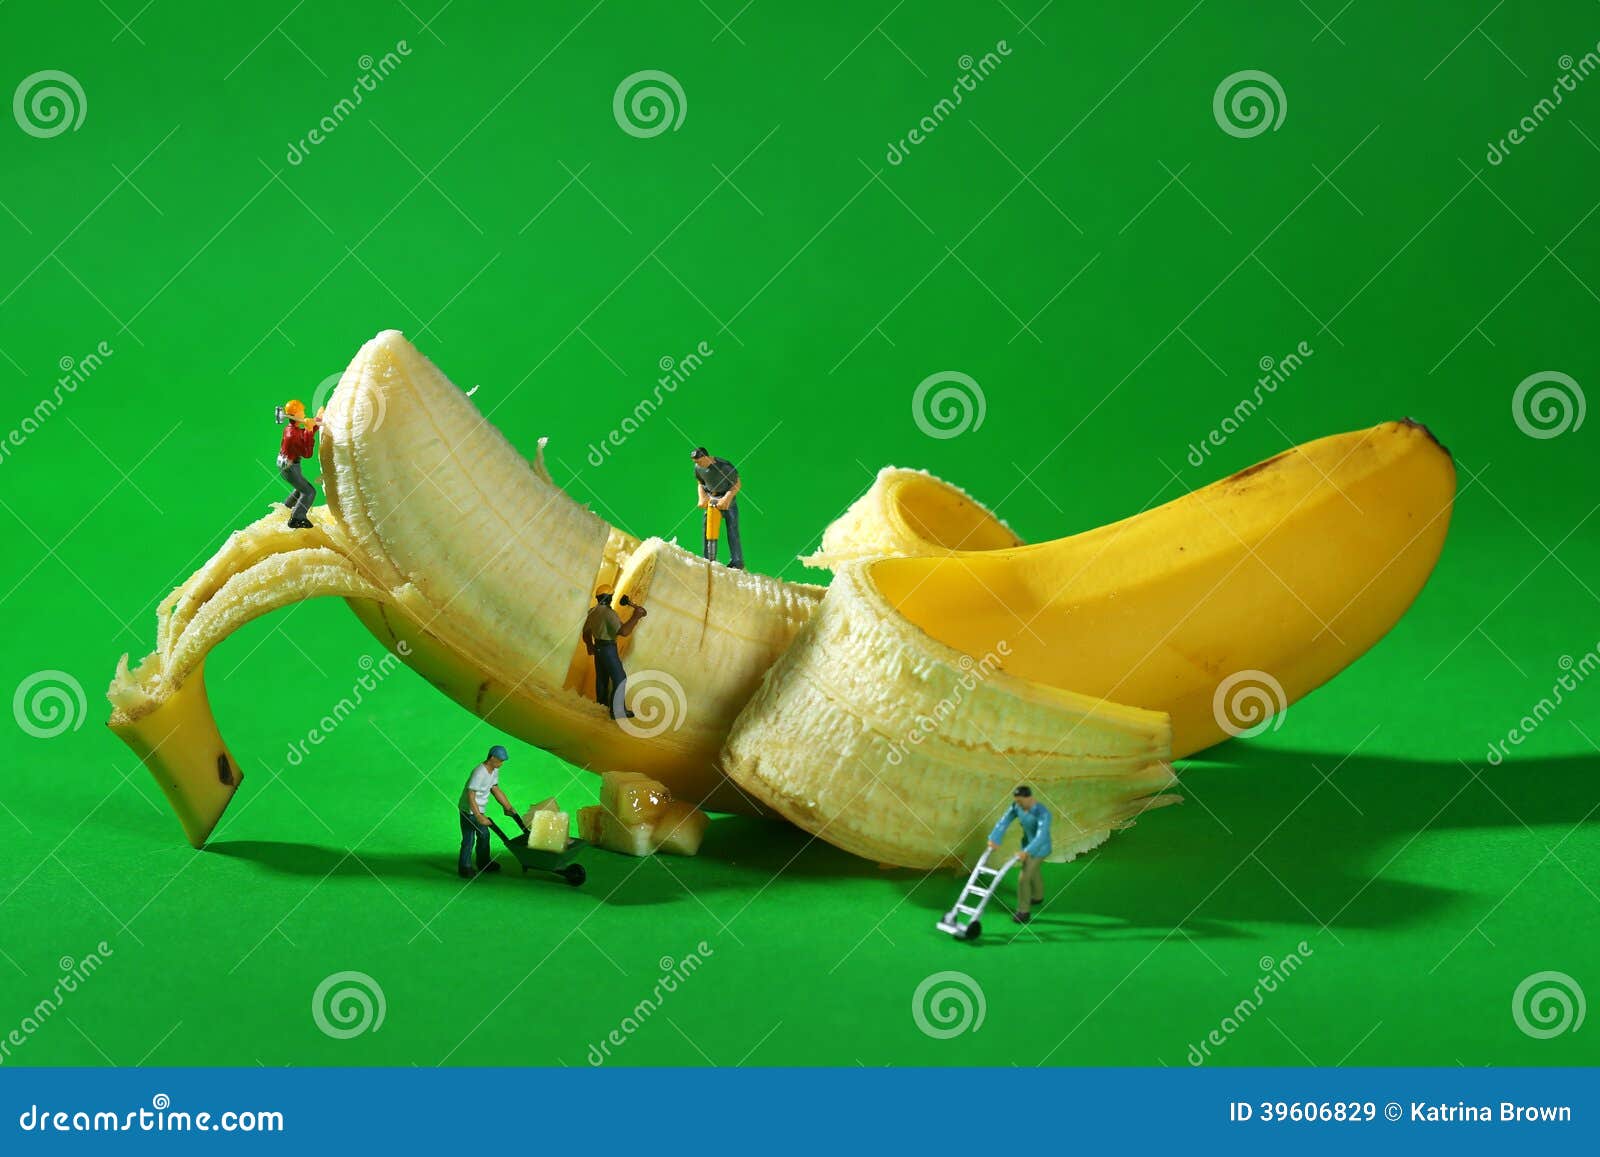 construction workers in conceptual food imagery with banana